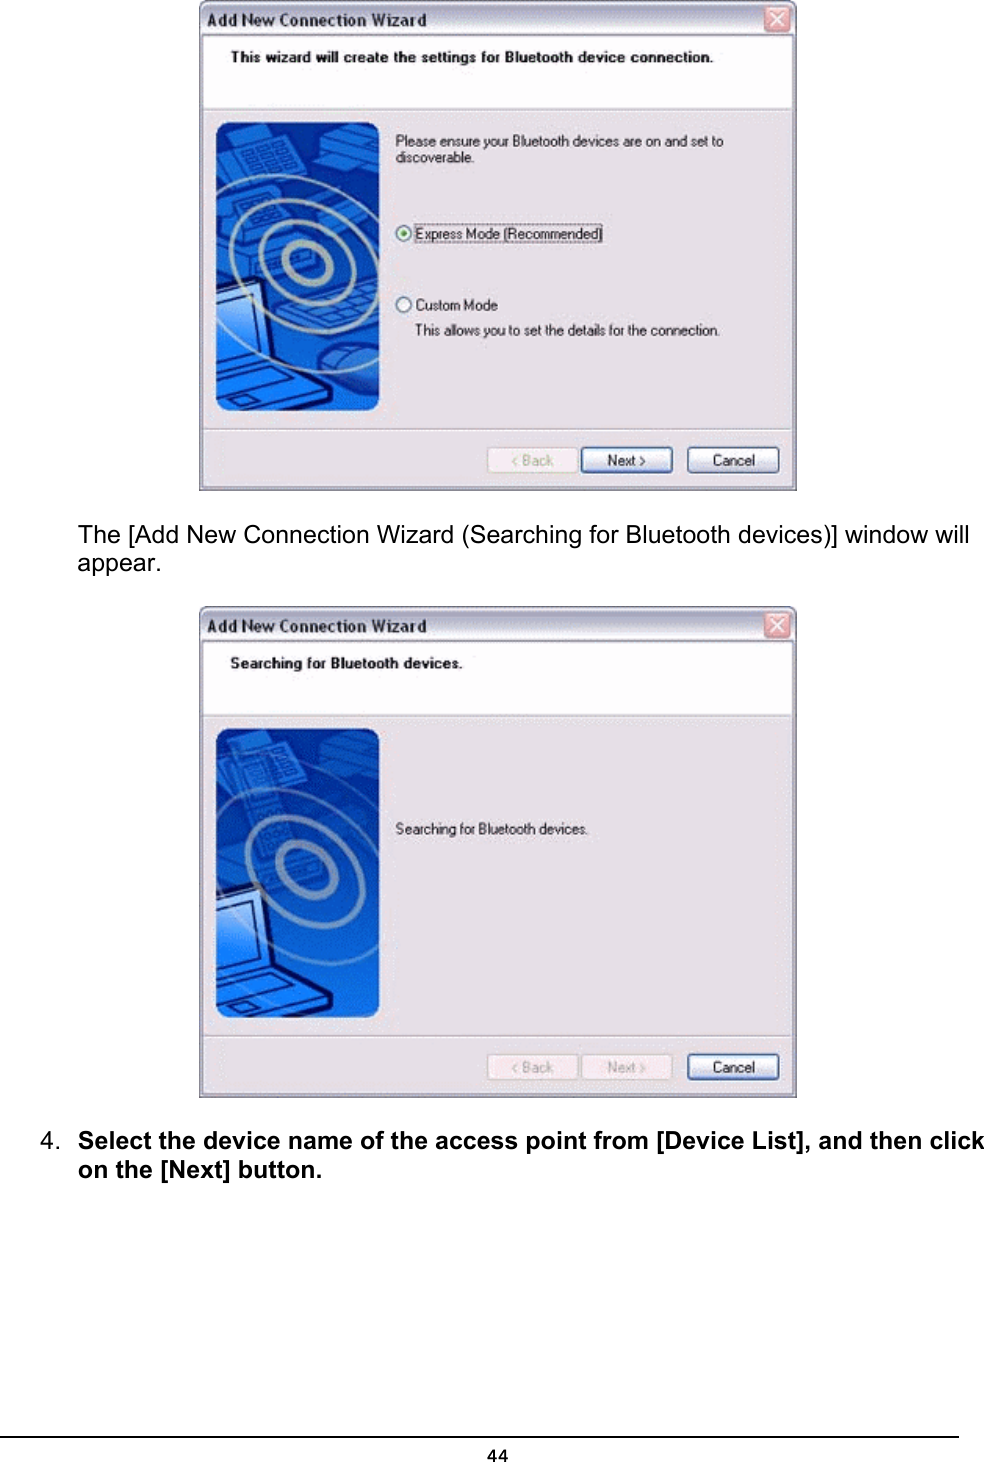   The [Add New Connection Wizard (Searching for Bluetooth devices)] window will appear.  4.  Select the device name of the access point from [Device List], and then click on the [Next] button.  44